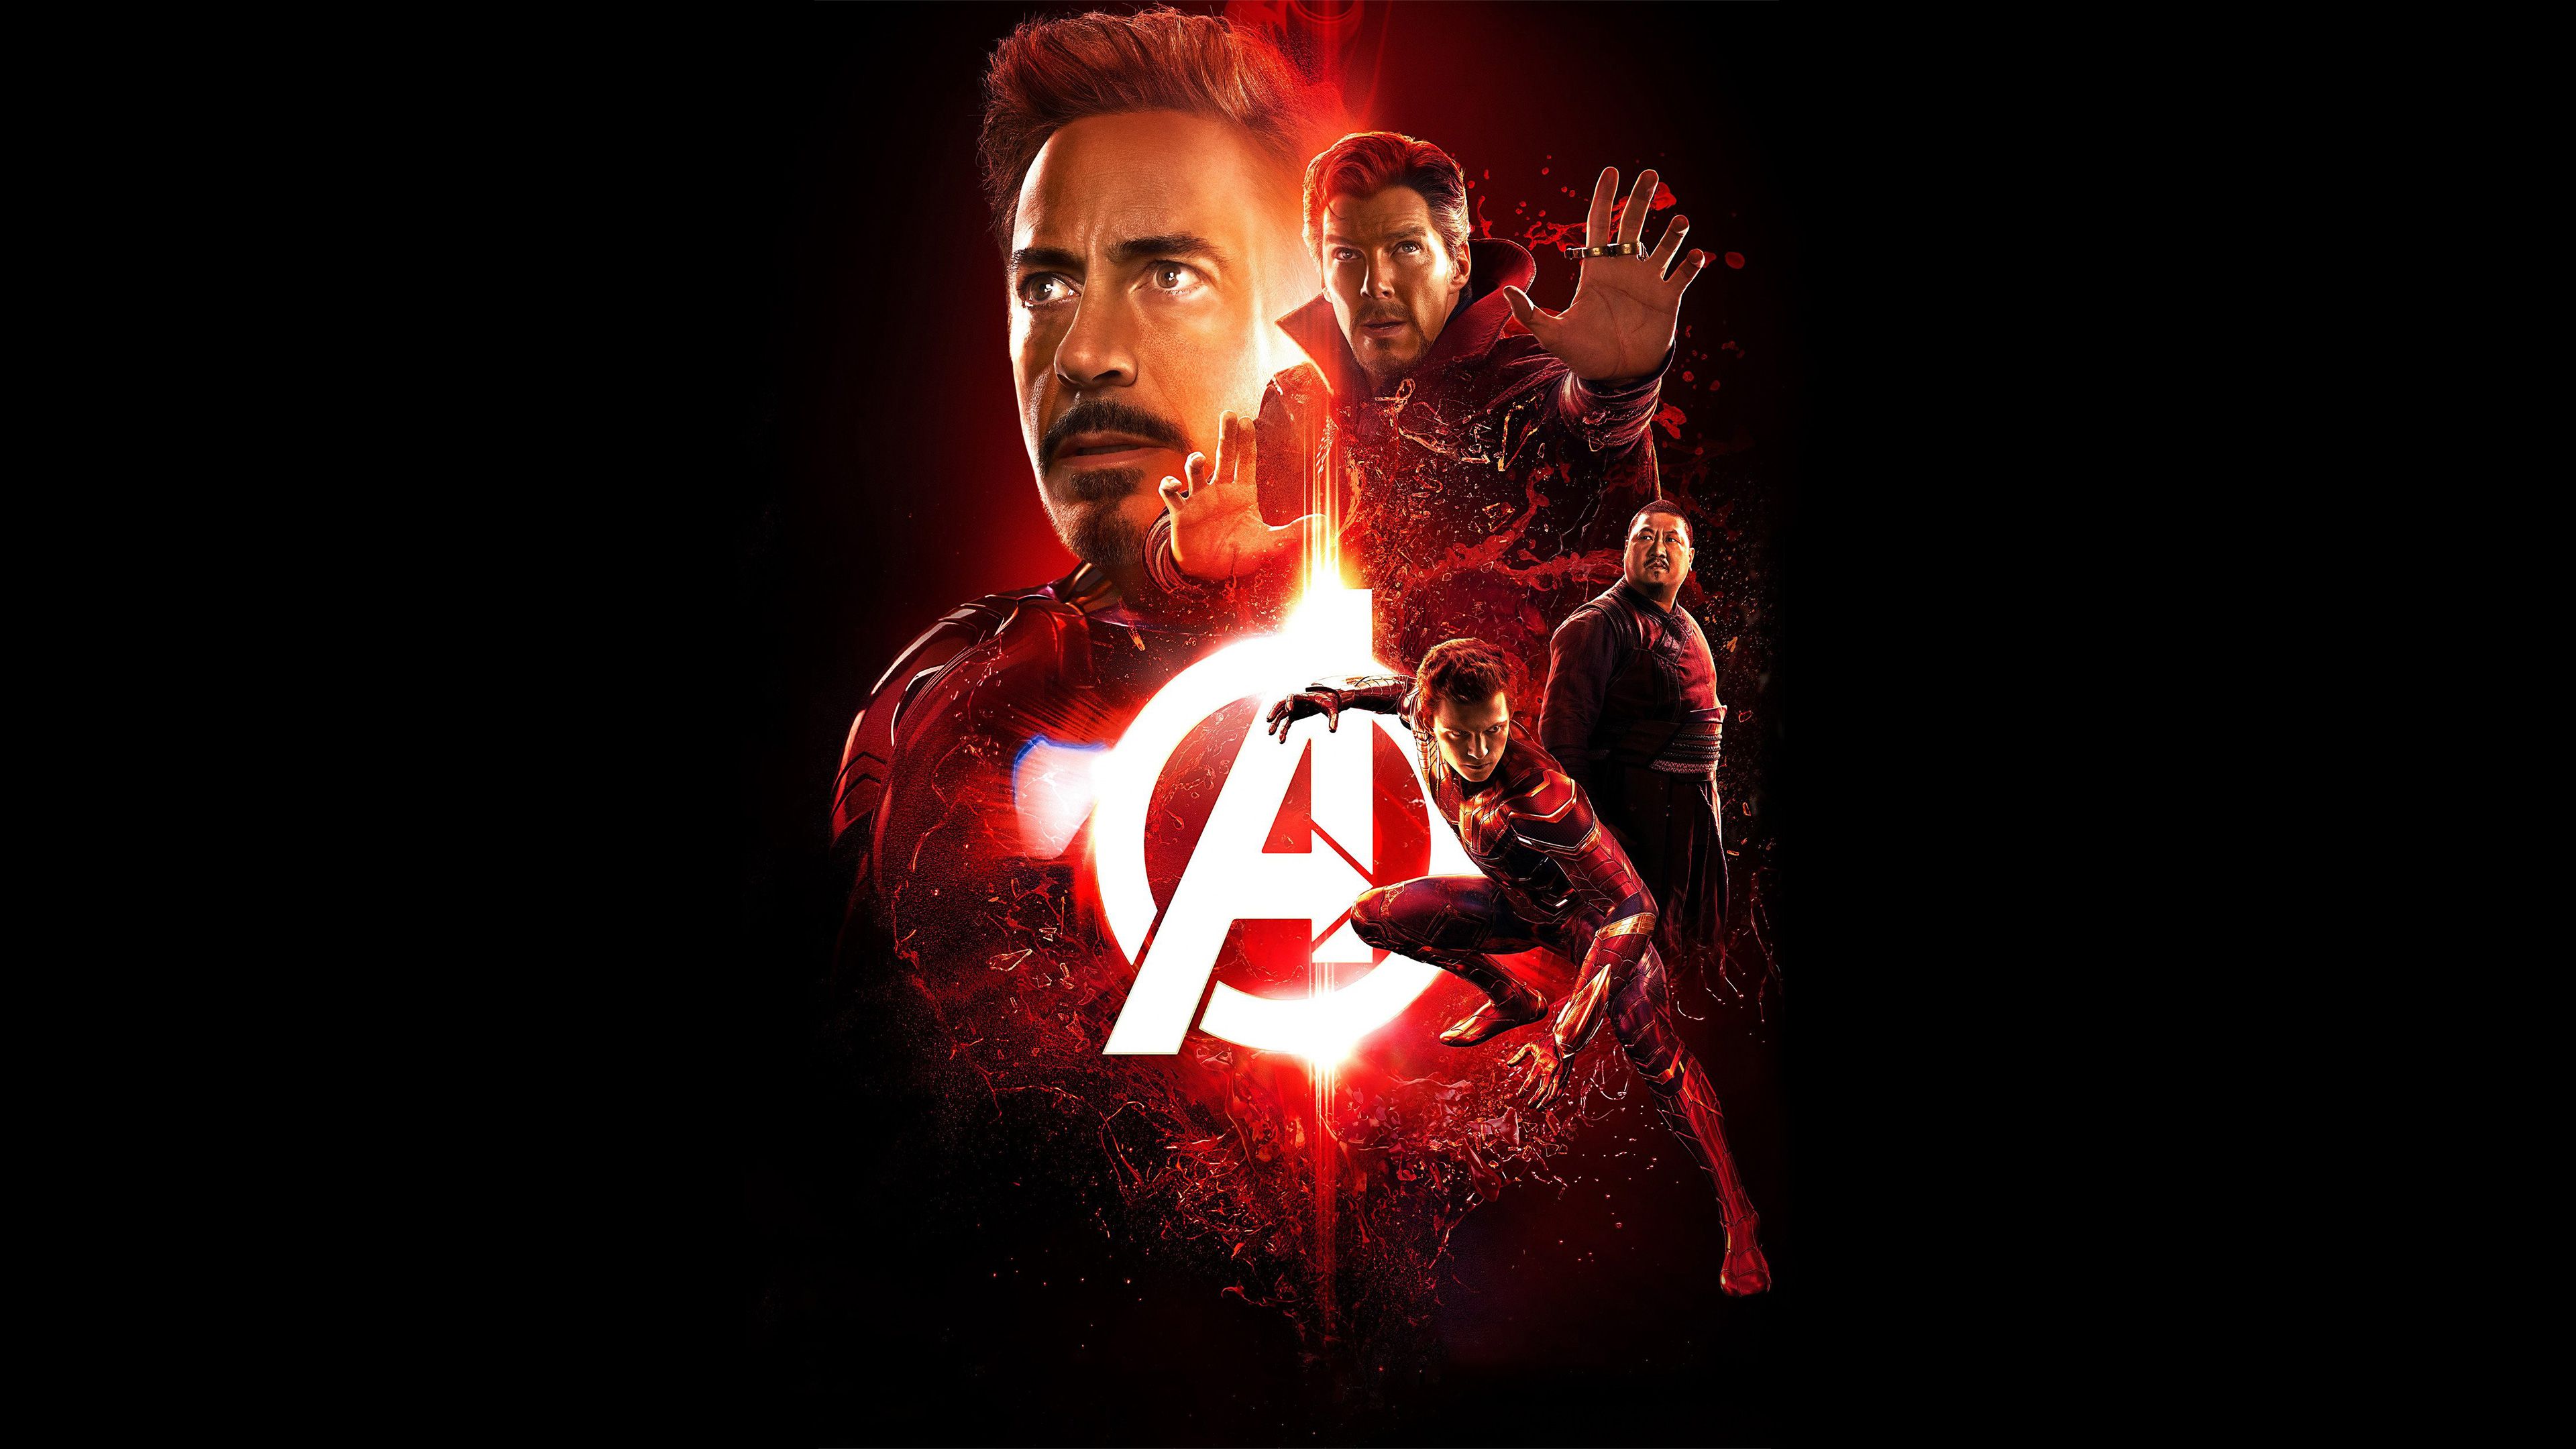 Avengers Infinity War 4k Ultra HD Wallpaper And Background Image